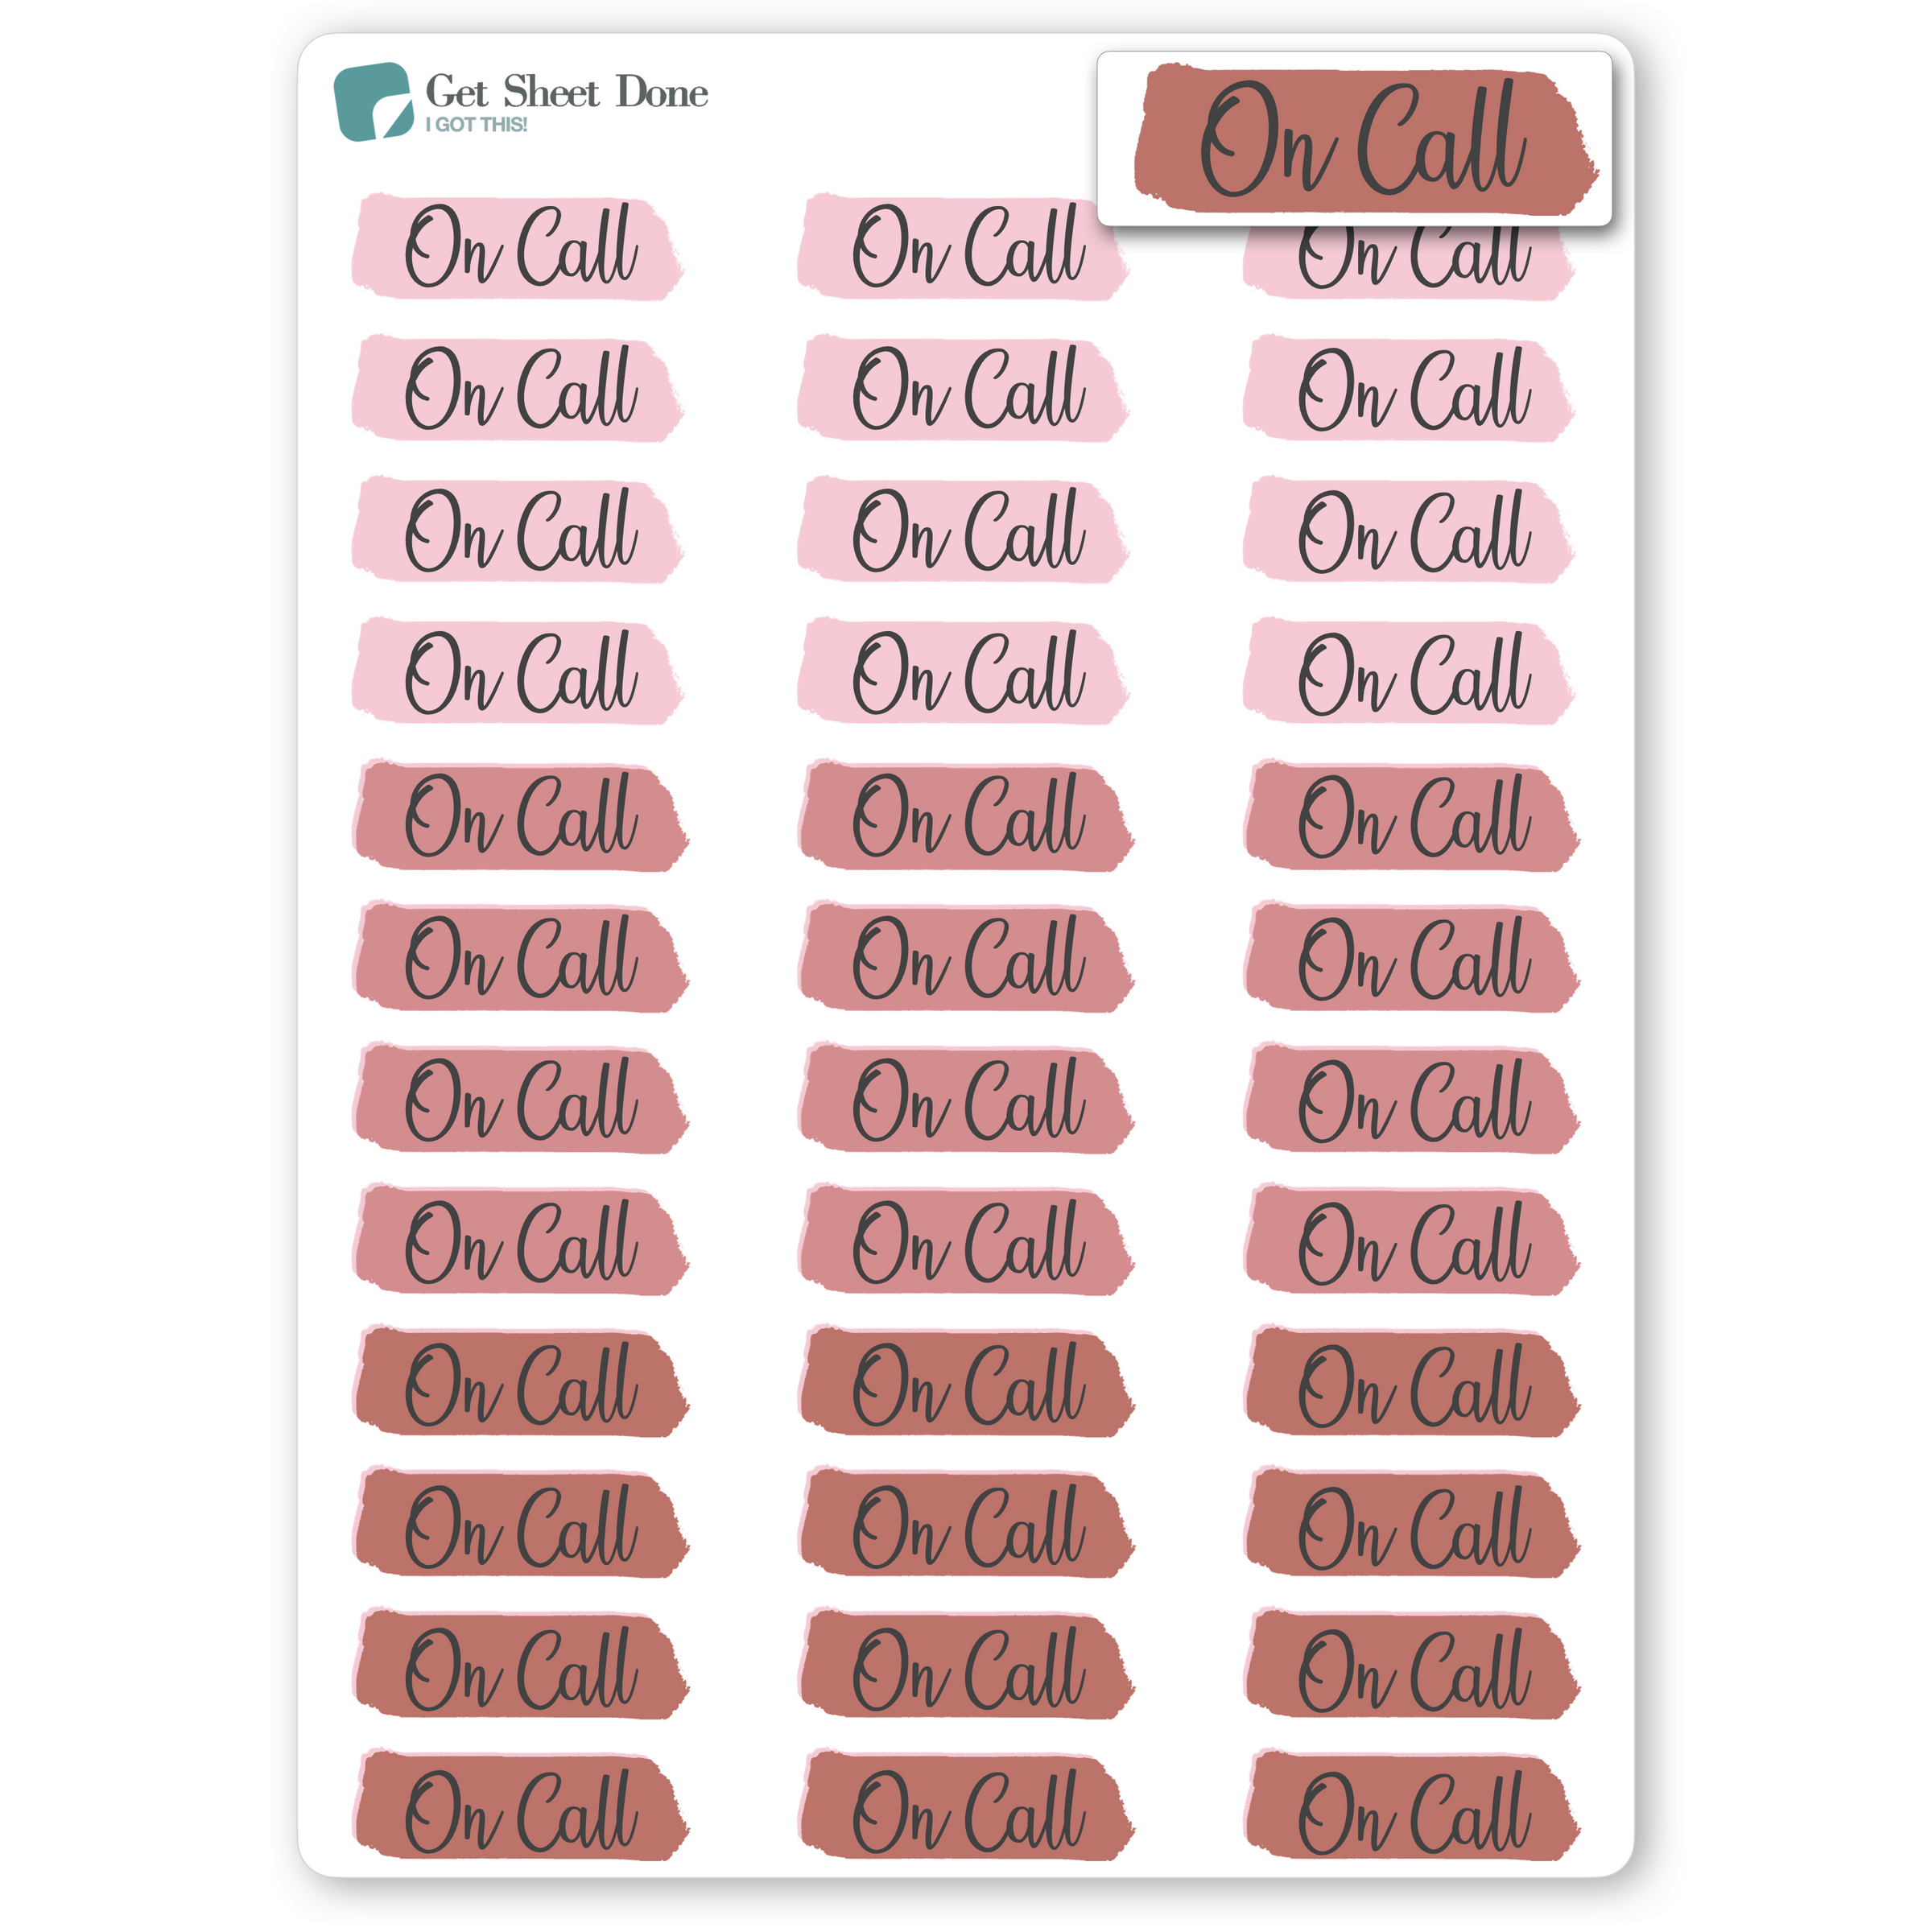 Highlight On Call Planner Stickers / Appointments Reminder Stickers/ DIY Calendar Stickers / Script Text  / Work Stickers / Bullet Journaling / Bujo / Essential Productivity Stickers